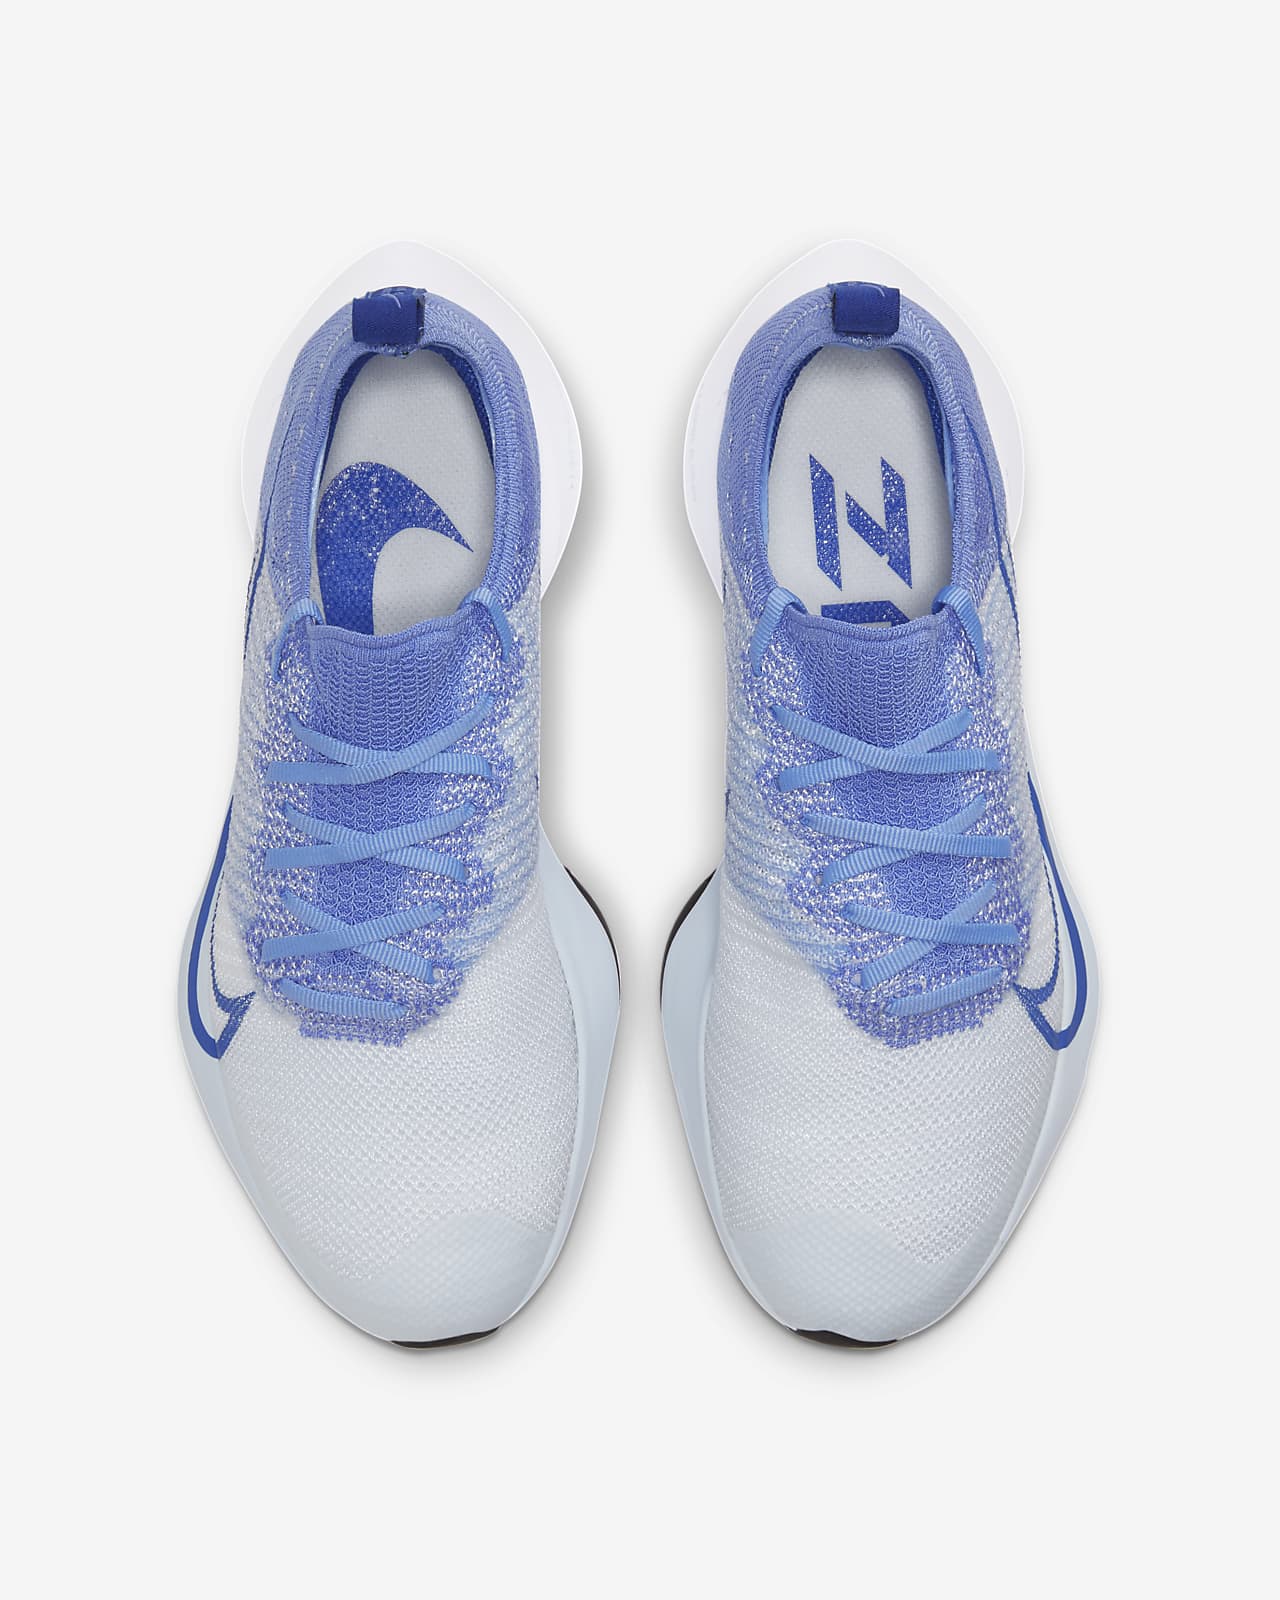 white and blue nike running shoes